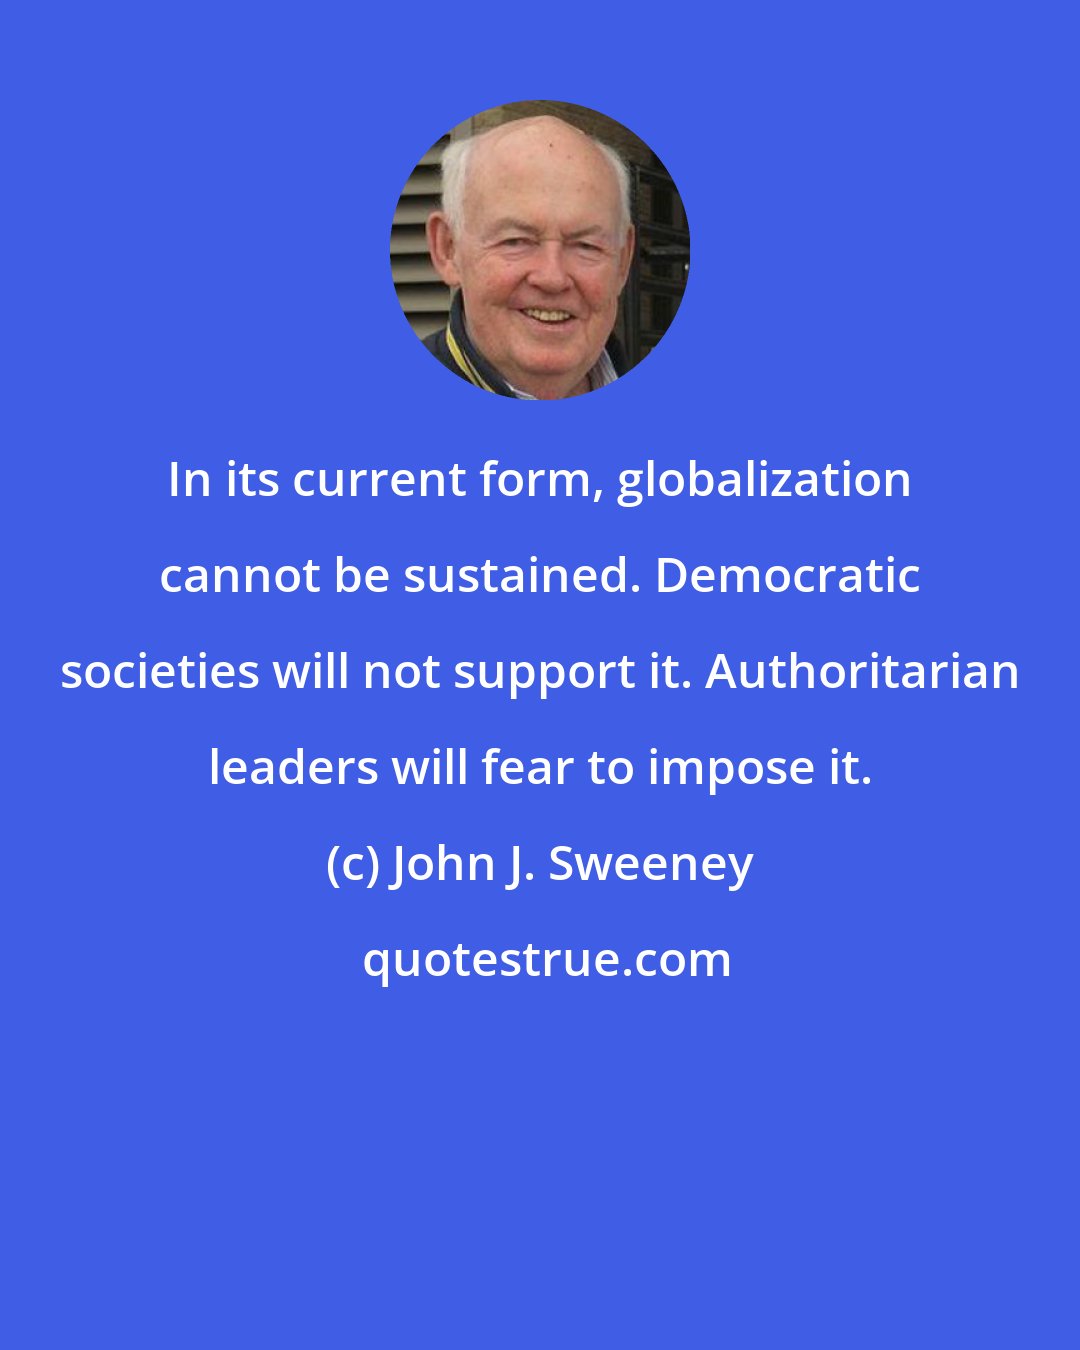 John J. Sweeney: In its current form, globalization cannot be sustained. Democratic societies will not support it. Authoritarian leaders will fear to impose it.